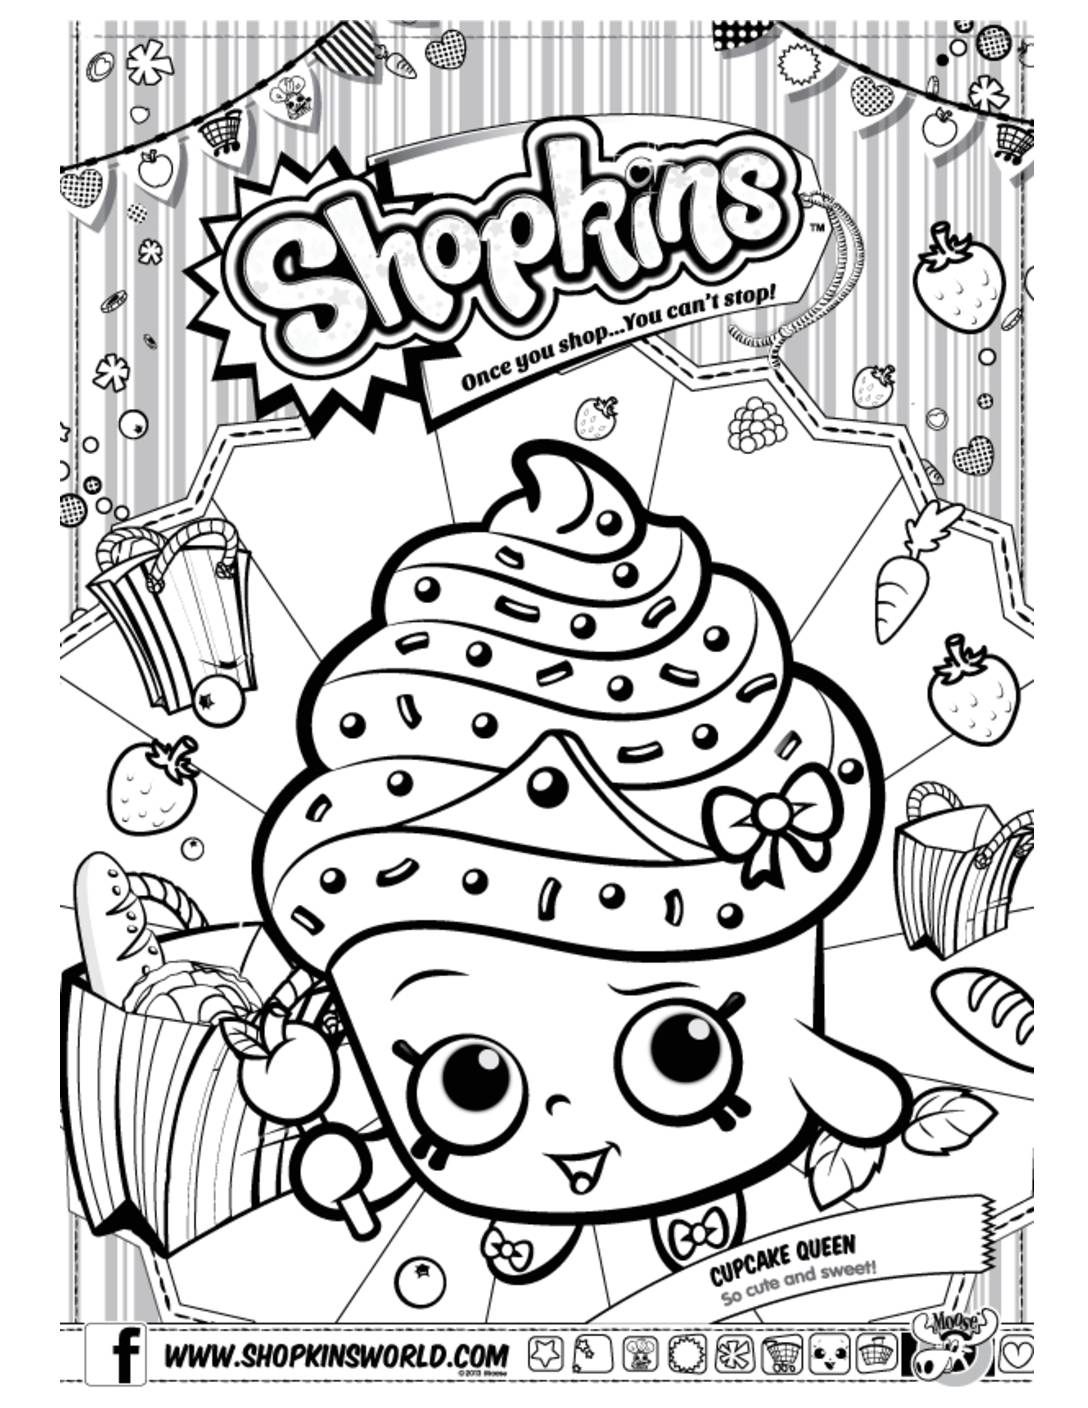 Shopkins Coloring Page 20